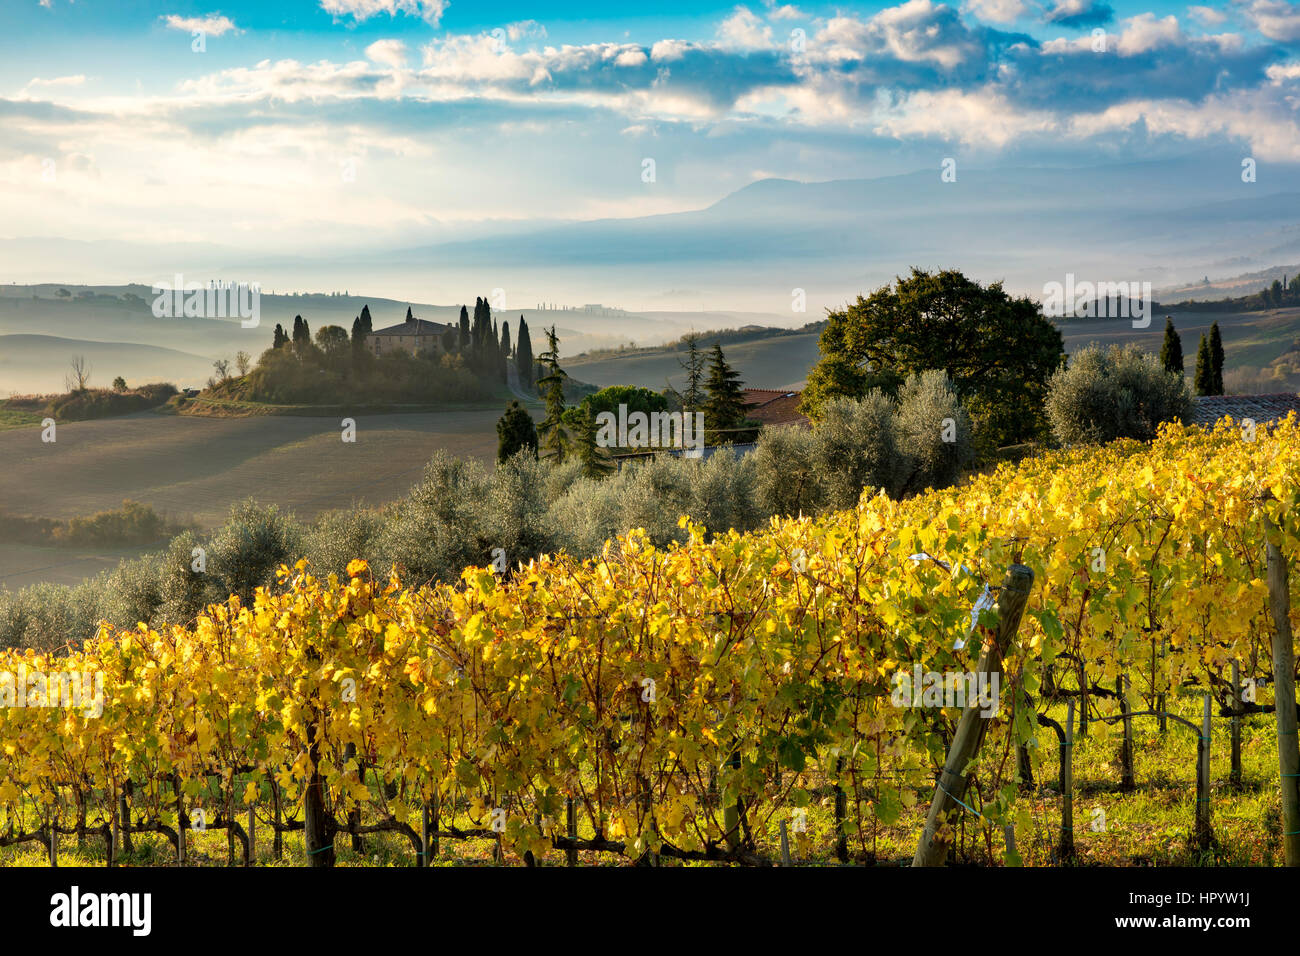 Early morning over vineyard and the Belvedere near San Quirico d'Orcia, Tuscany, Italy Stock Photo